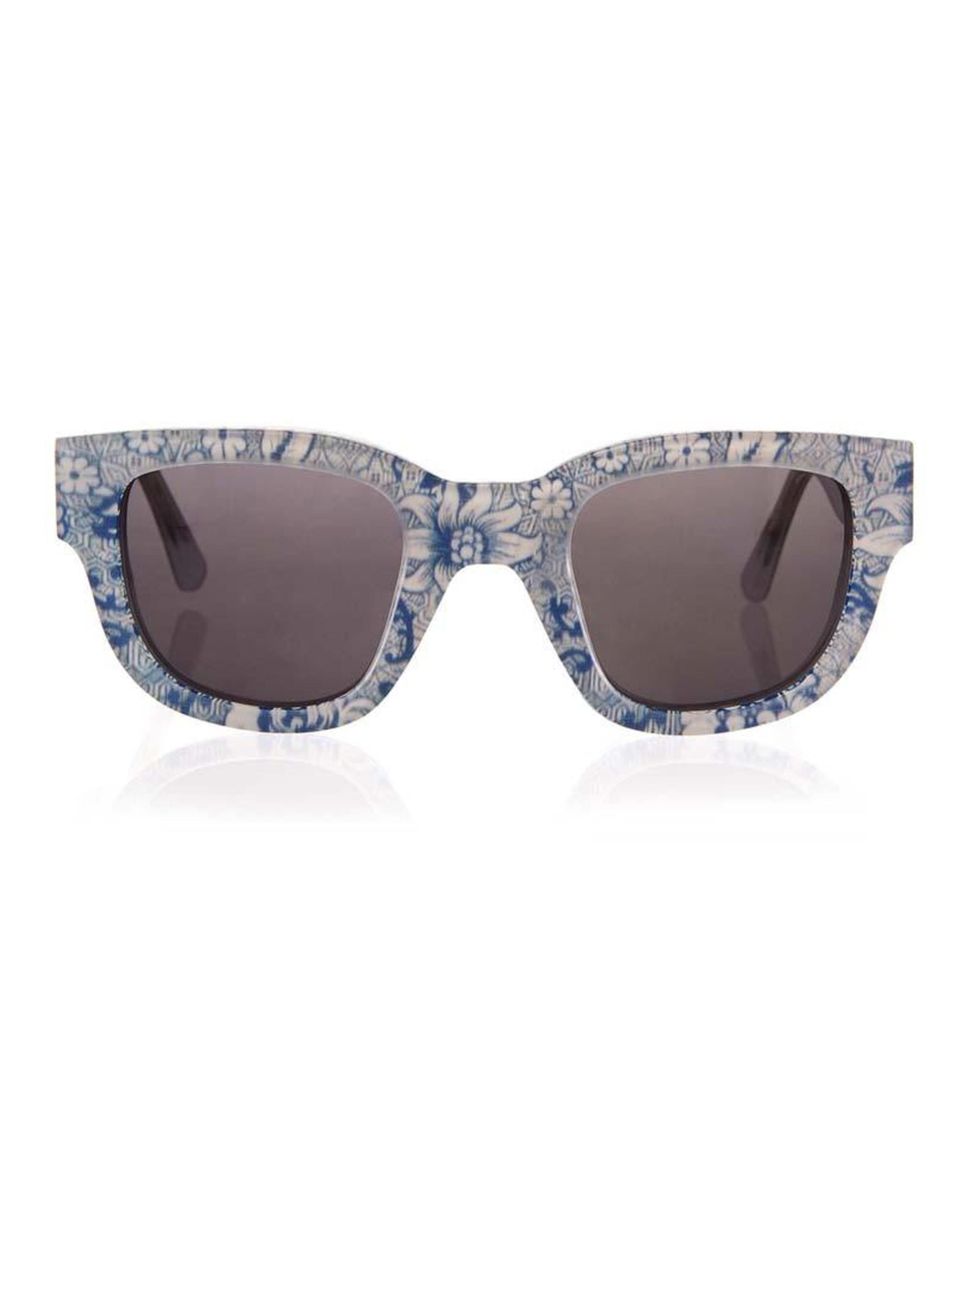 <p>Archive print..  Modern shape</p><p>Acne Studios Liberty print collaboration sunglasses £250 from <a href="http://www.liberty.co.uk/fcp/product/Liberty//Blue-Frame-LA-Liberty-Print-Acetate-Sunglasses/100522">Liberty</a></p>